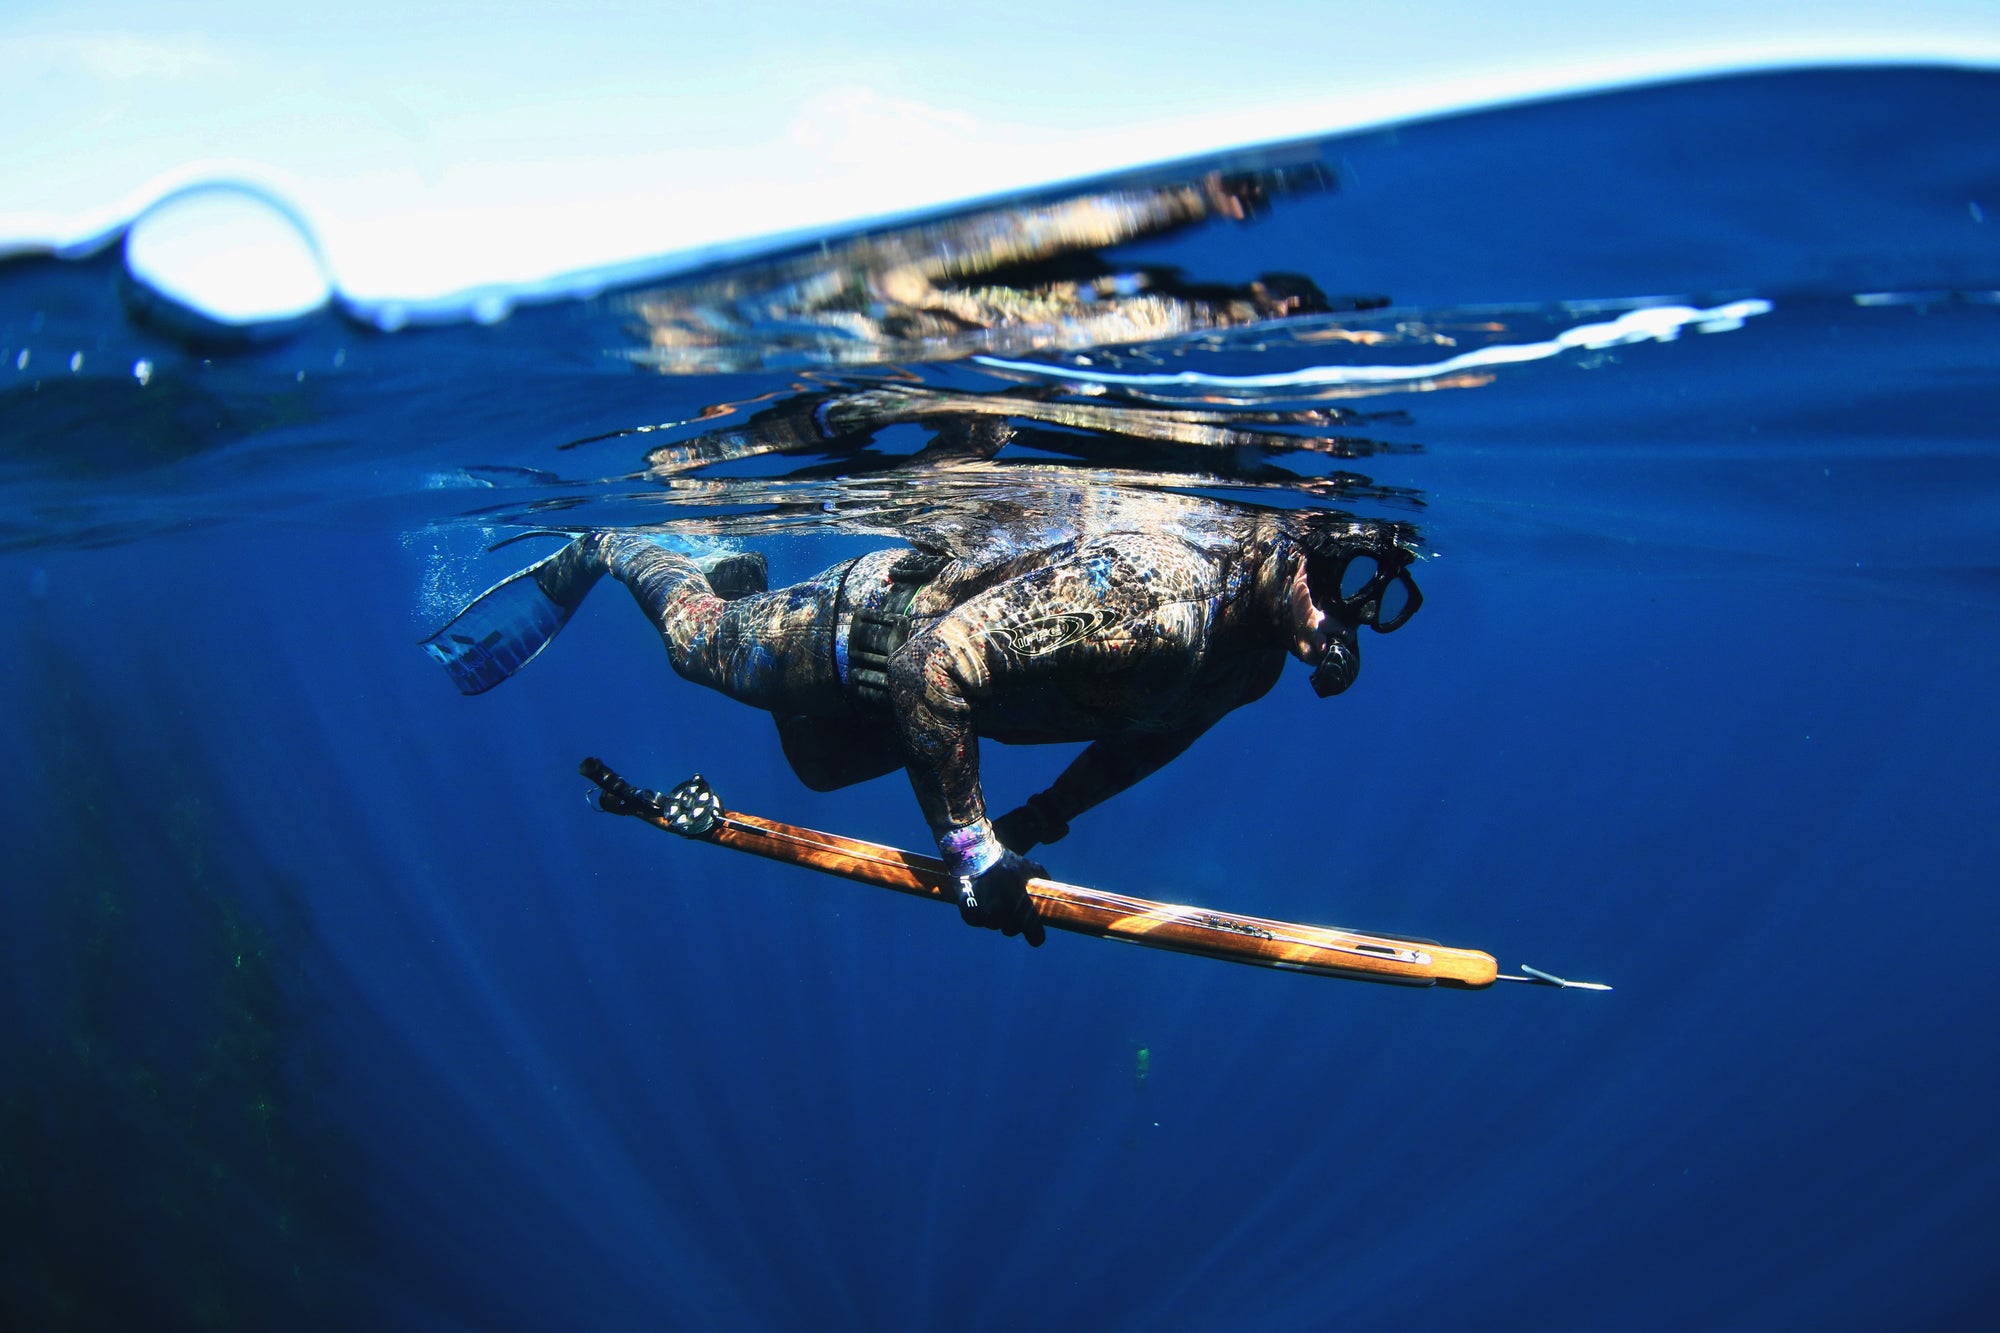 "Chasing Giants" by Kinetic Spearfishing